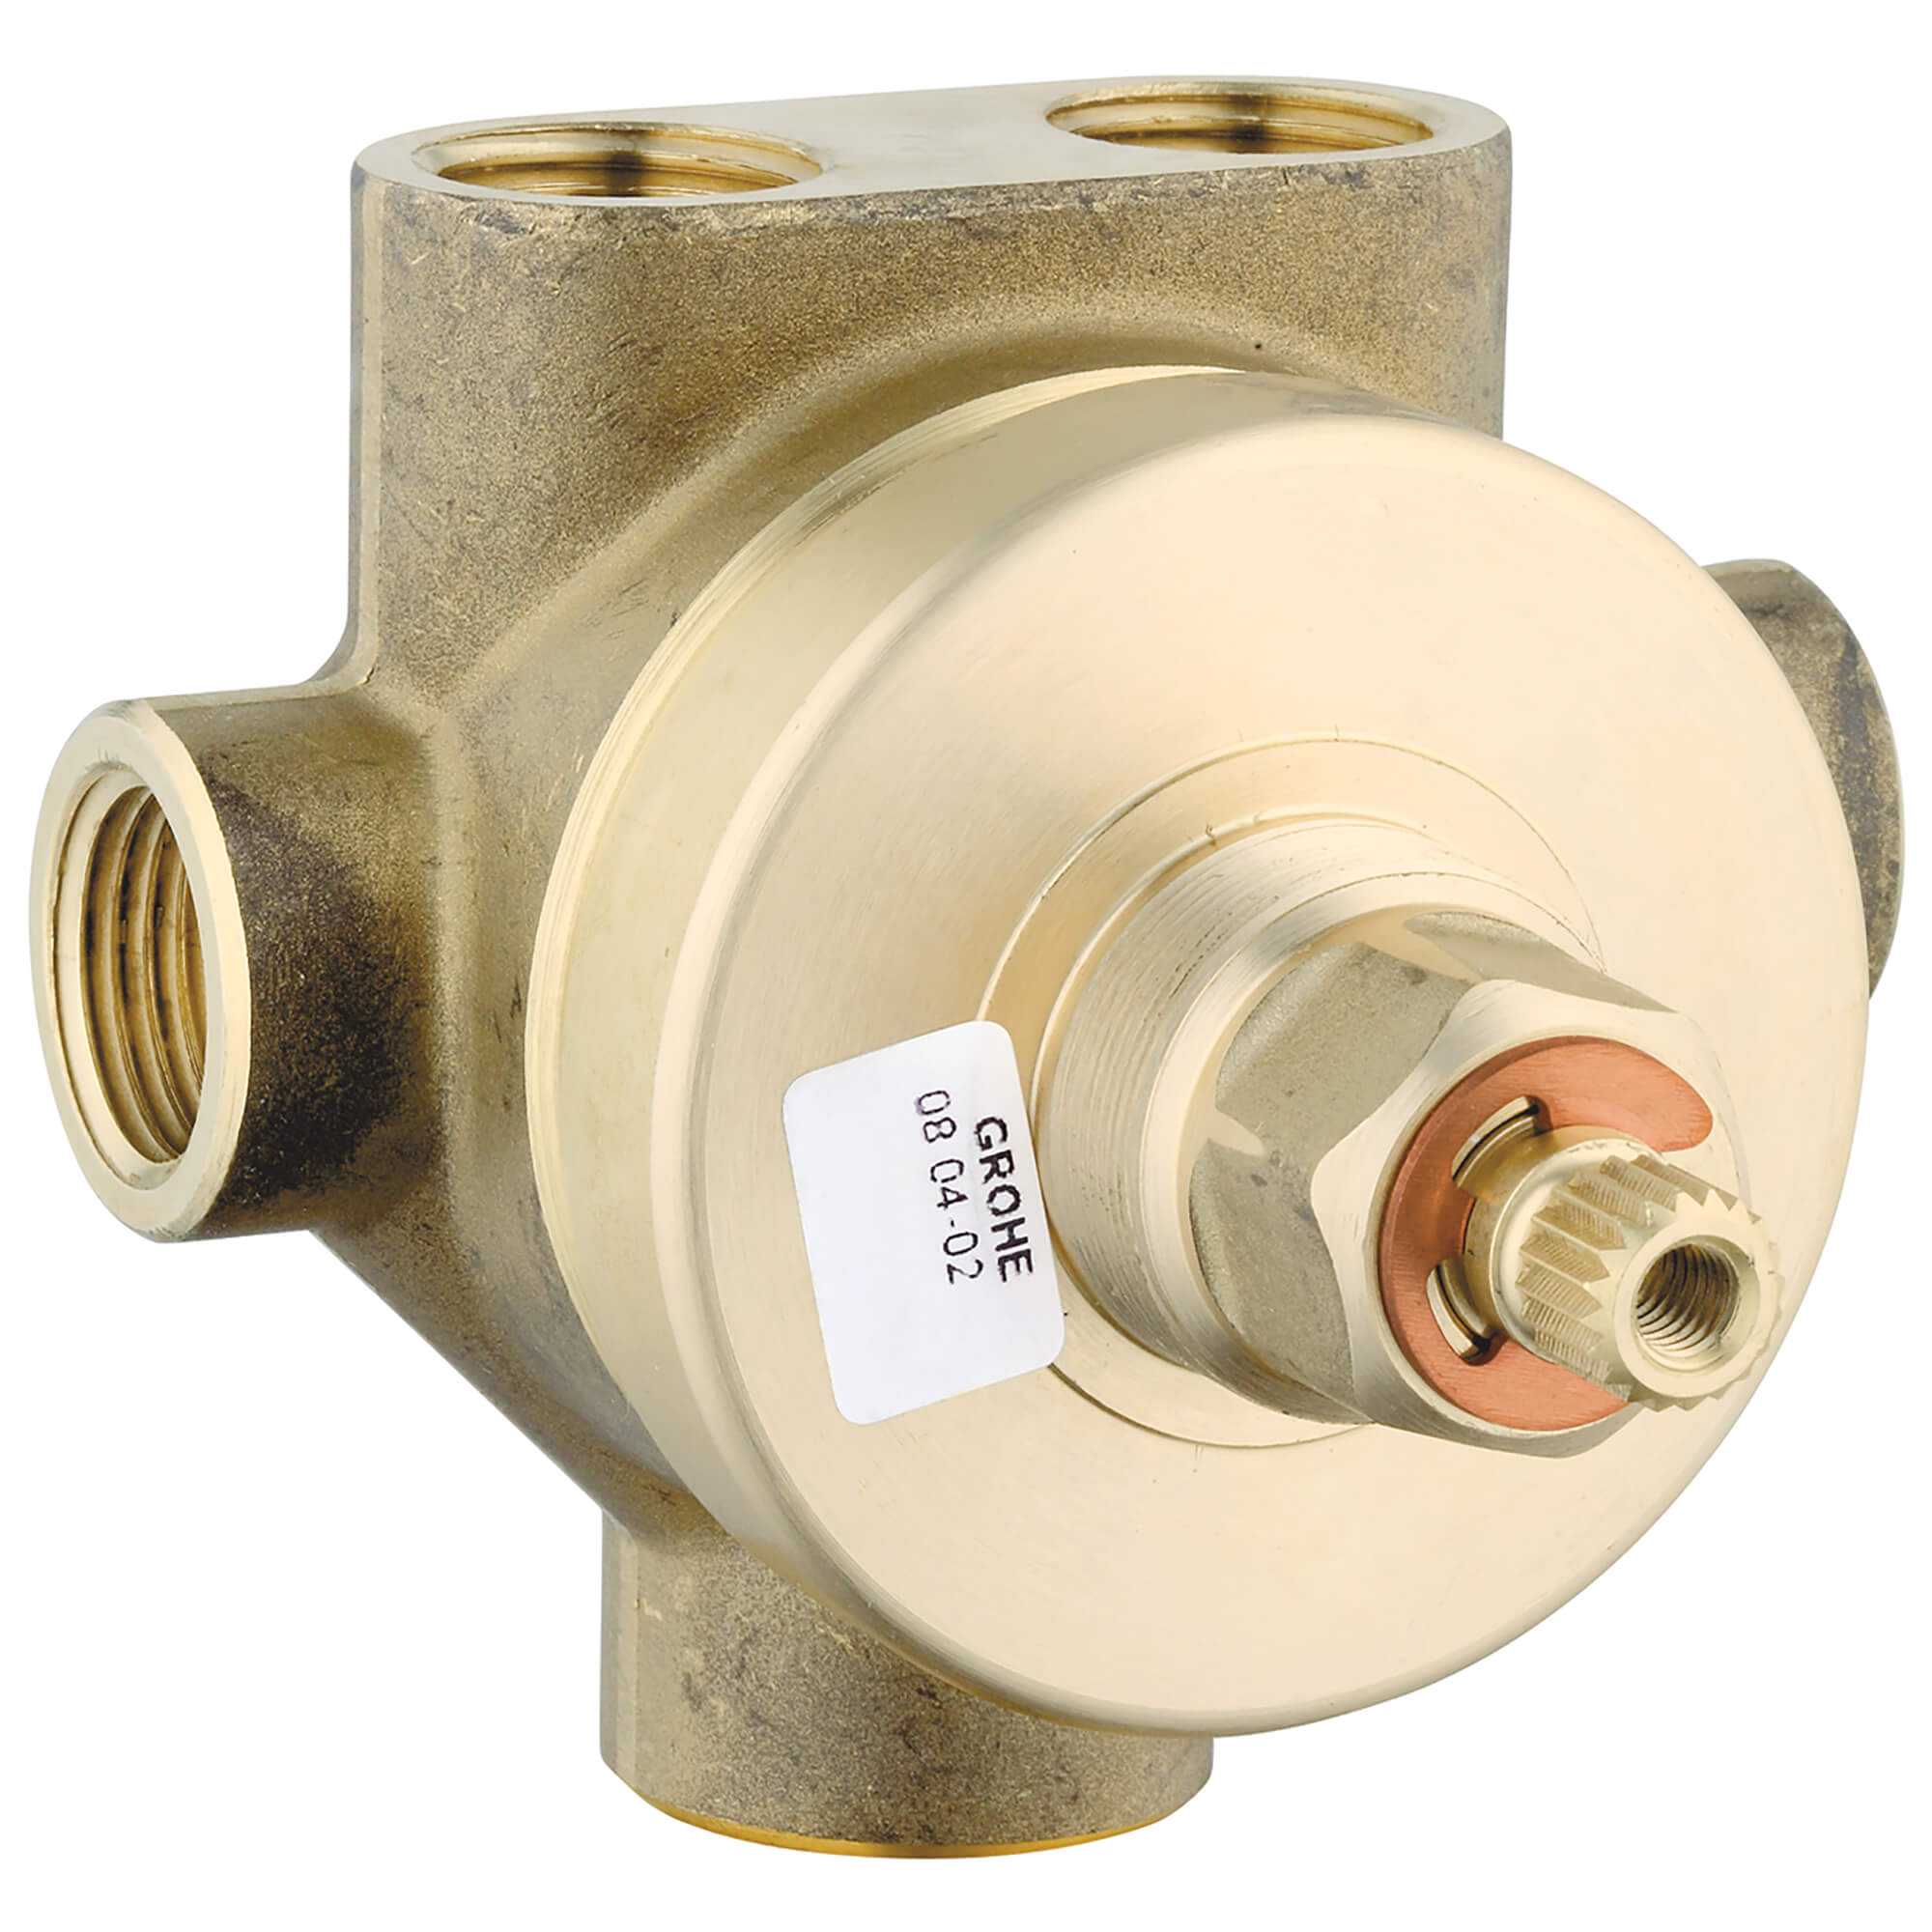 3-Way Diverter Rough-In Valve (Shared Functions)